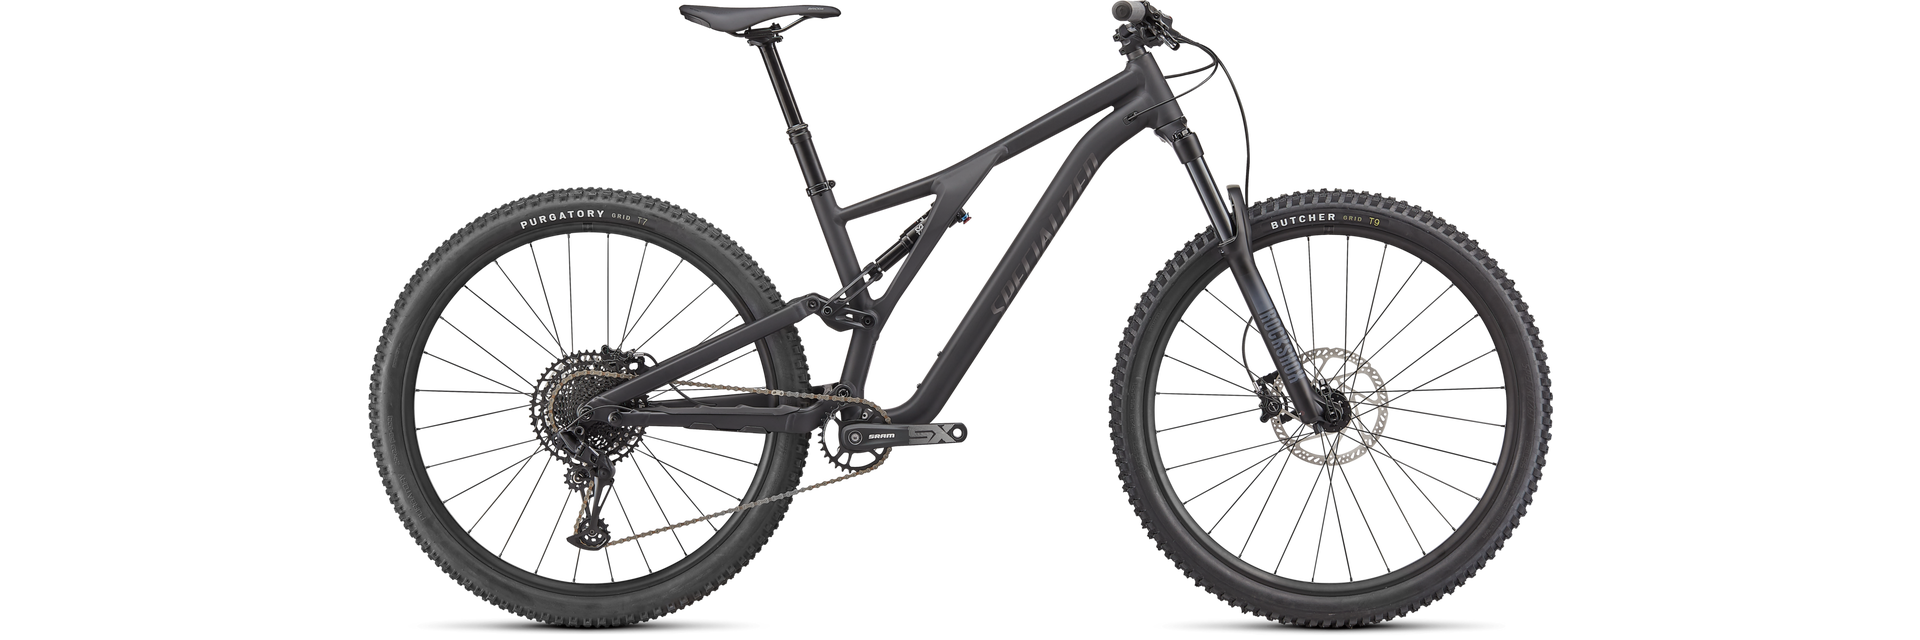 Photo - Specialized Stumpjumper Alloy